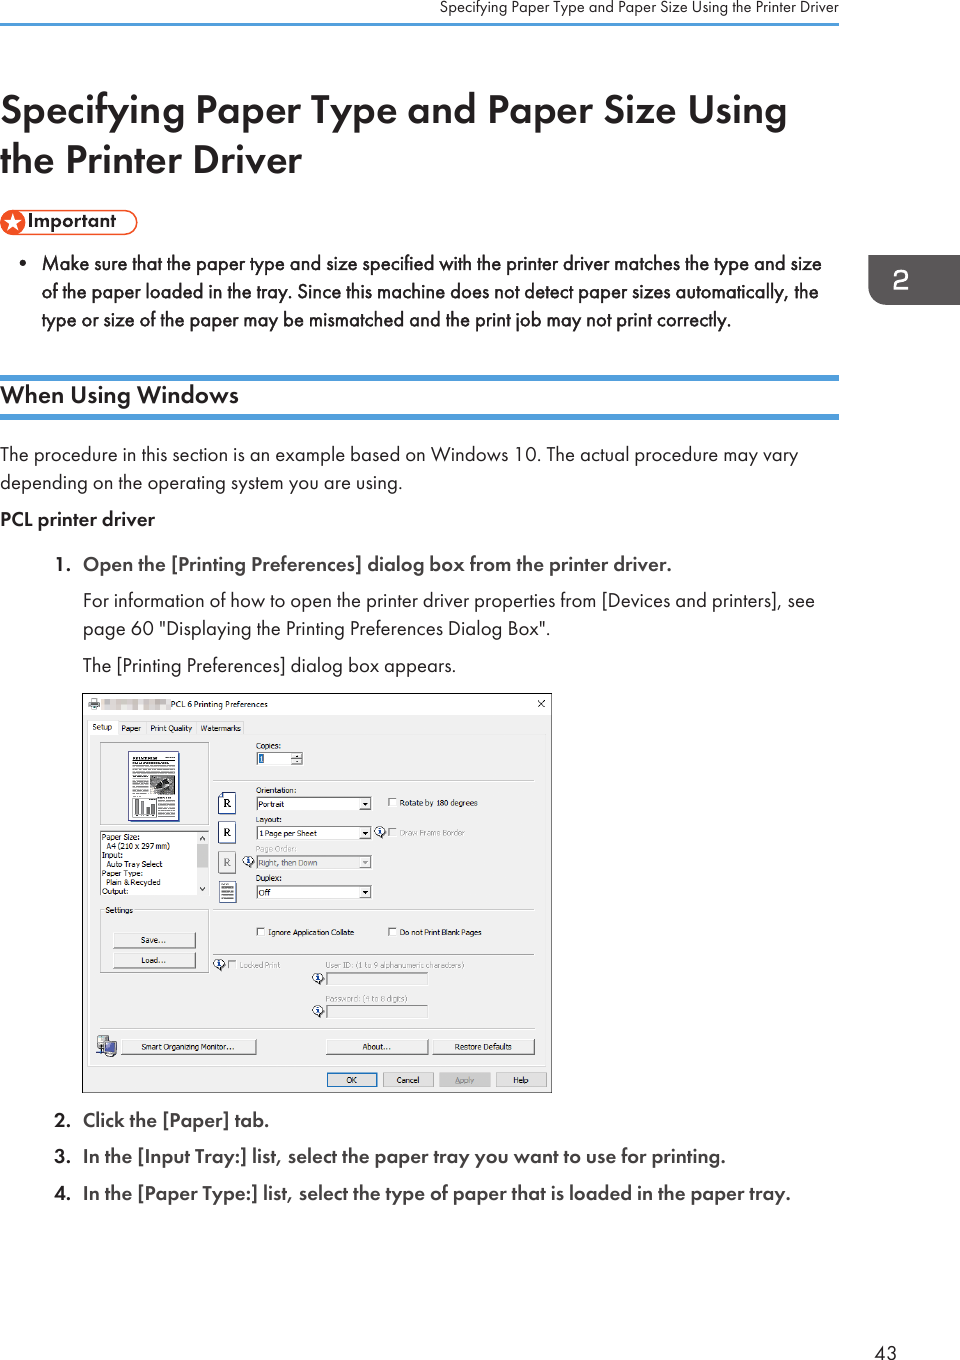 Specifying Paper Type and Paper Size Usingthe Printer Driver• Make sure that the paper type and size specified with the printer driver matches the type and sizeof the paper loaded in the tray. Since this machine does not detect paper sizes automatically, thetype or size of the paper may be mismatched and the print job may not print correctly.When Using WindowsThe procedure in this section is an example based on Windows 10. The actual procedure may varydepending on the operating system you are using.PCL printer driver1. Open the [Printing Preferences] dialog box from the printer driver.For information of how to open the printer driver properties from [Devices and printers], seepage 60 &quot;Displaying the Printing Preferences Dialog Box&quot;.The [Printing Preferences] dialog box appears.2. Click the [Paper] tab.3. In the [Input Tray:] list, select the paper tray you want to use for printing.4. In the [Paper Type:] list, select the type of paper that is loaded in the paper tray.Specifying Paper Type and Paper Size Using the Printer Driver43